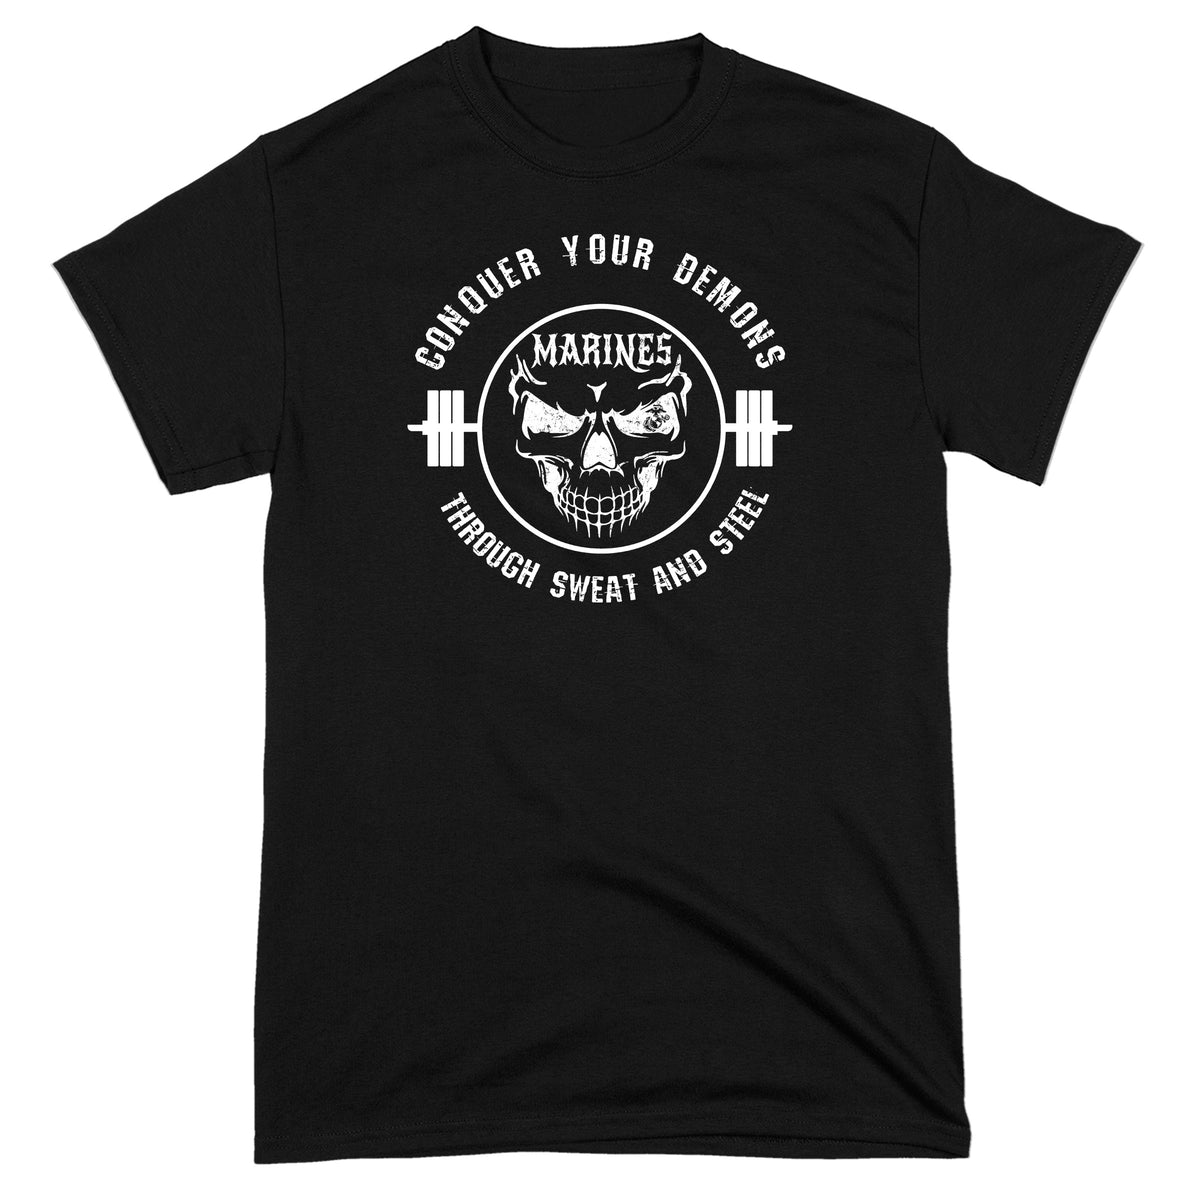 Conquer Your Demons Tee